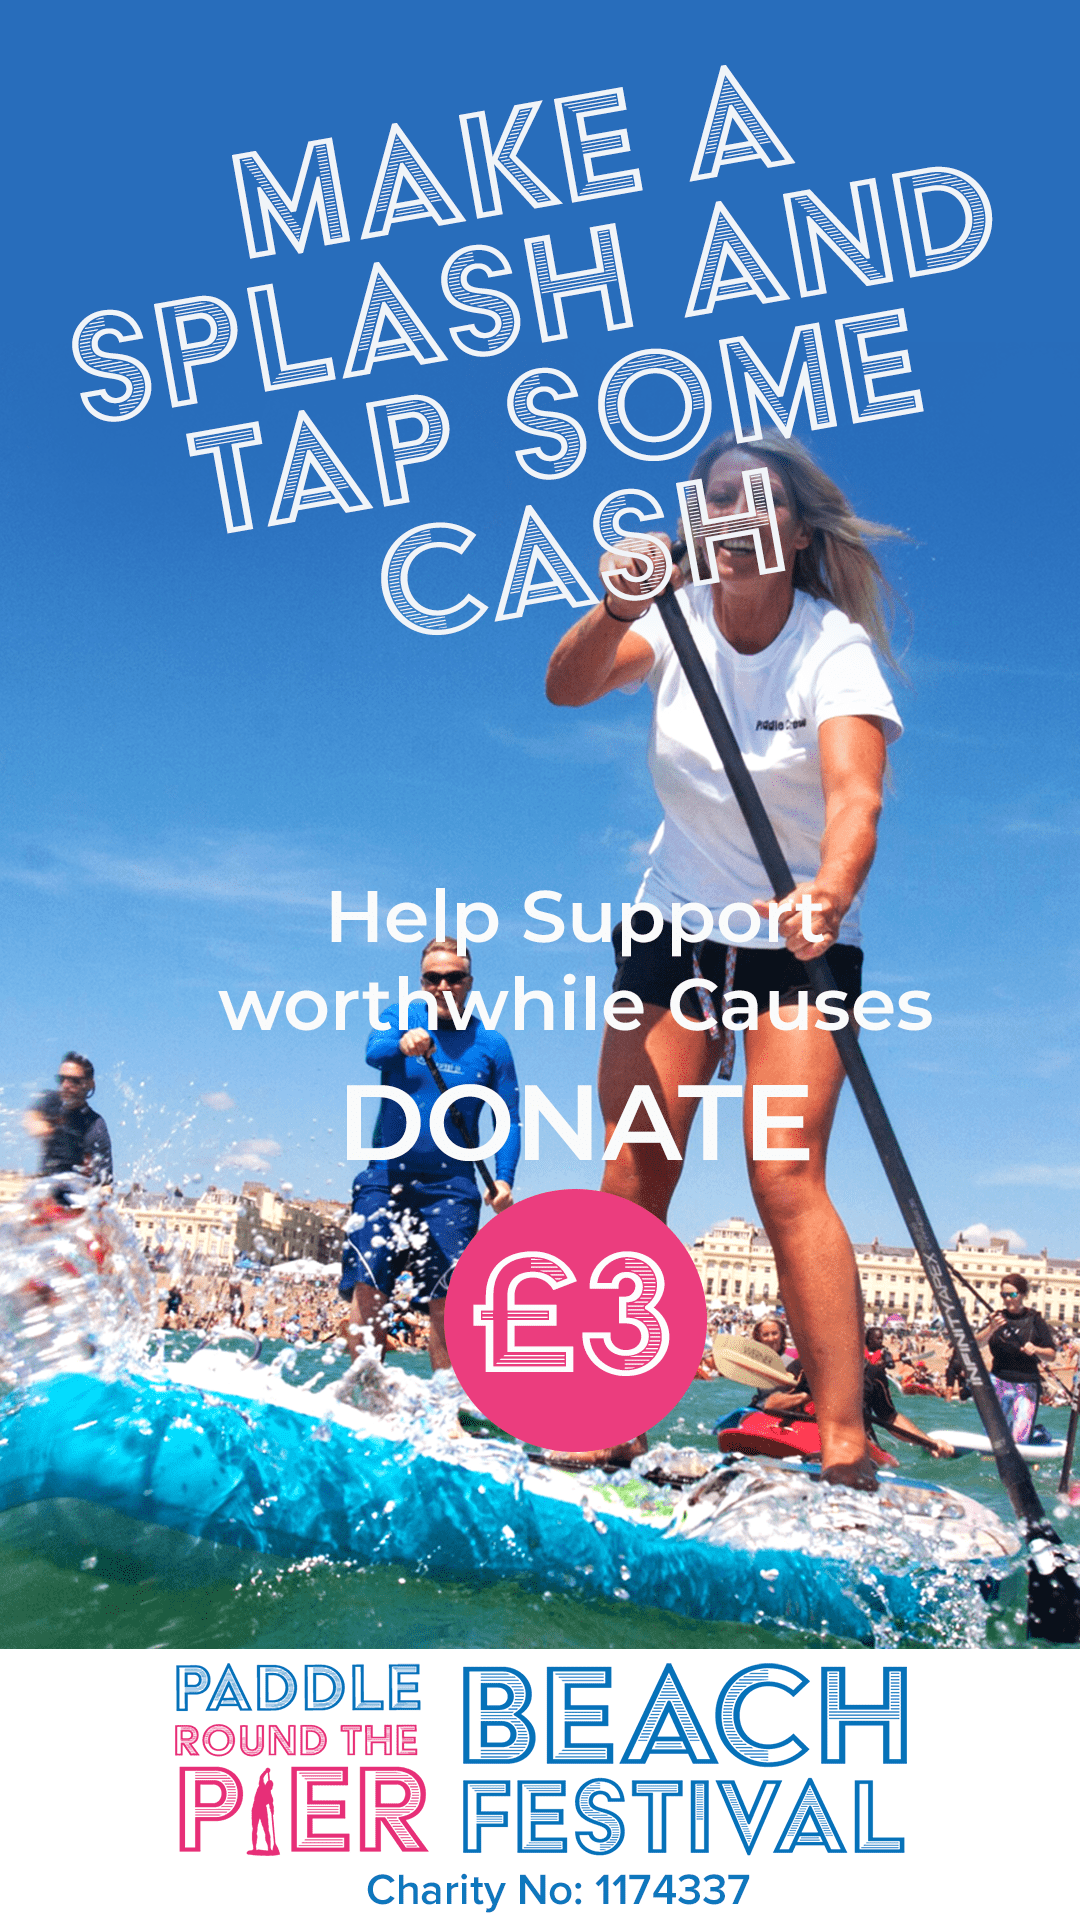 Paddle round the pier donation screen